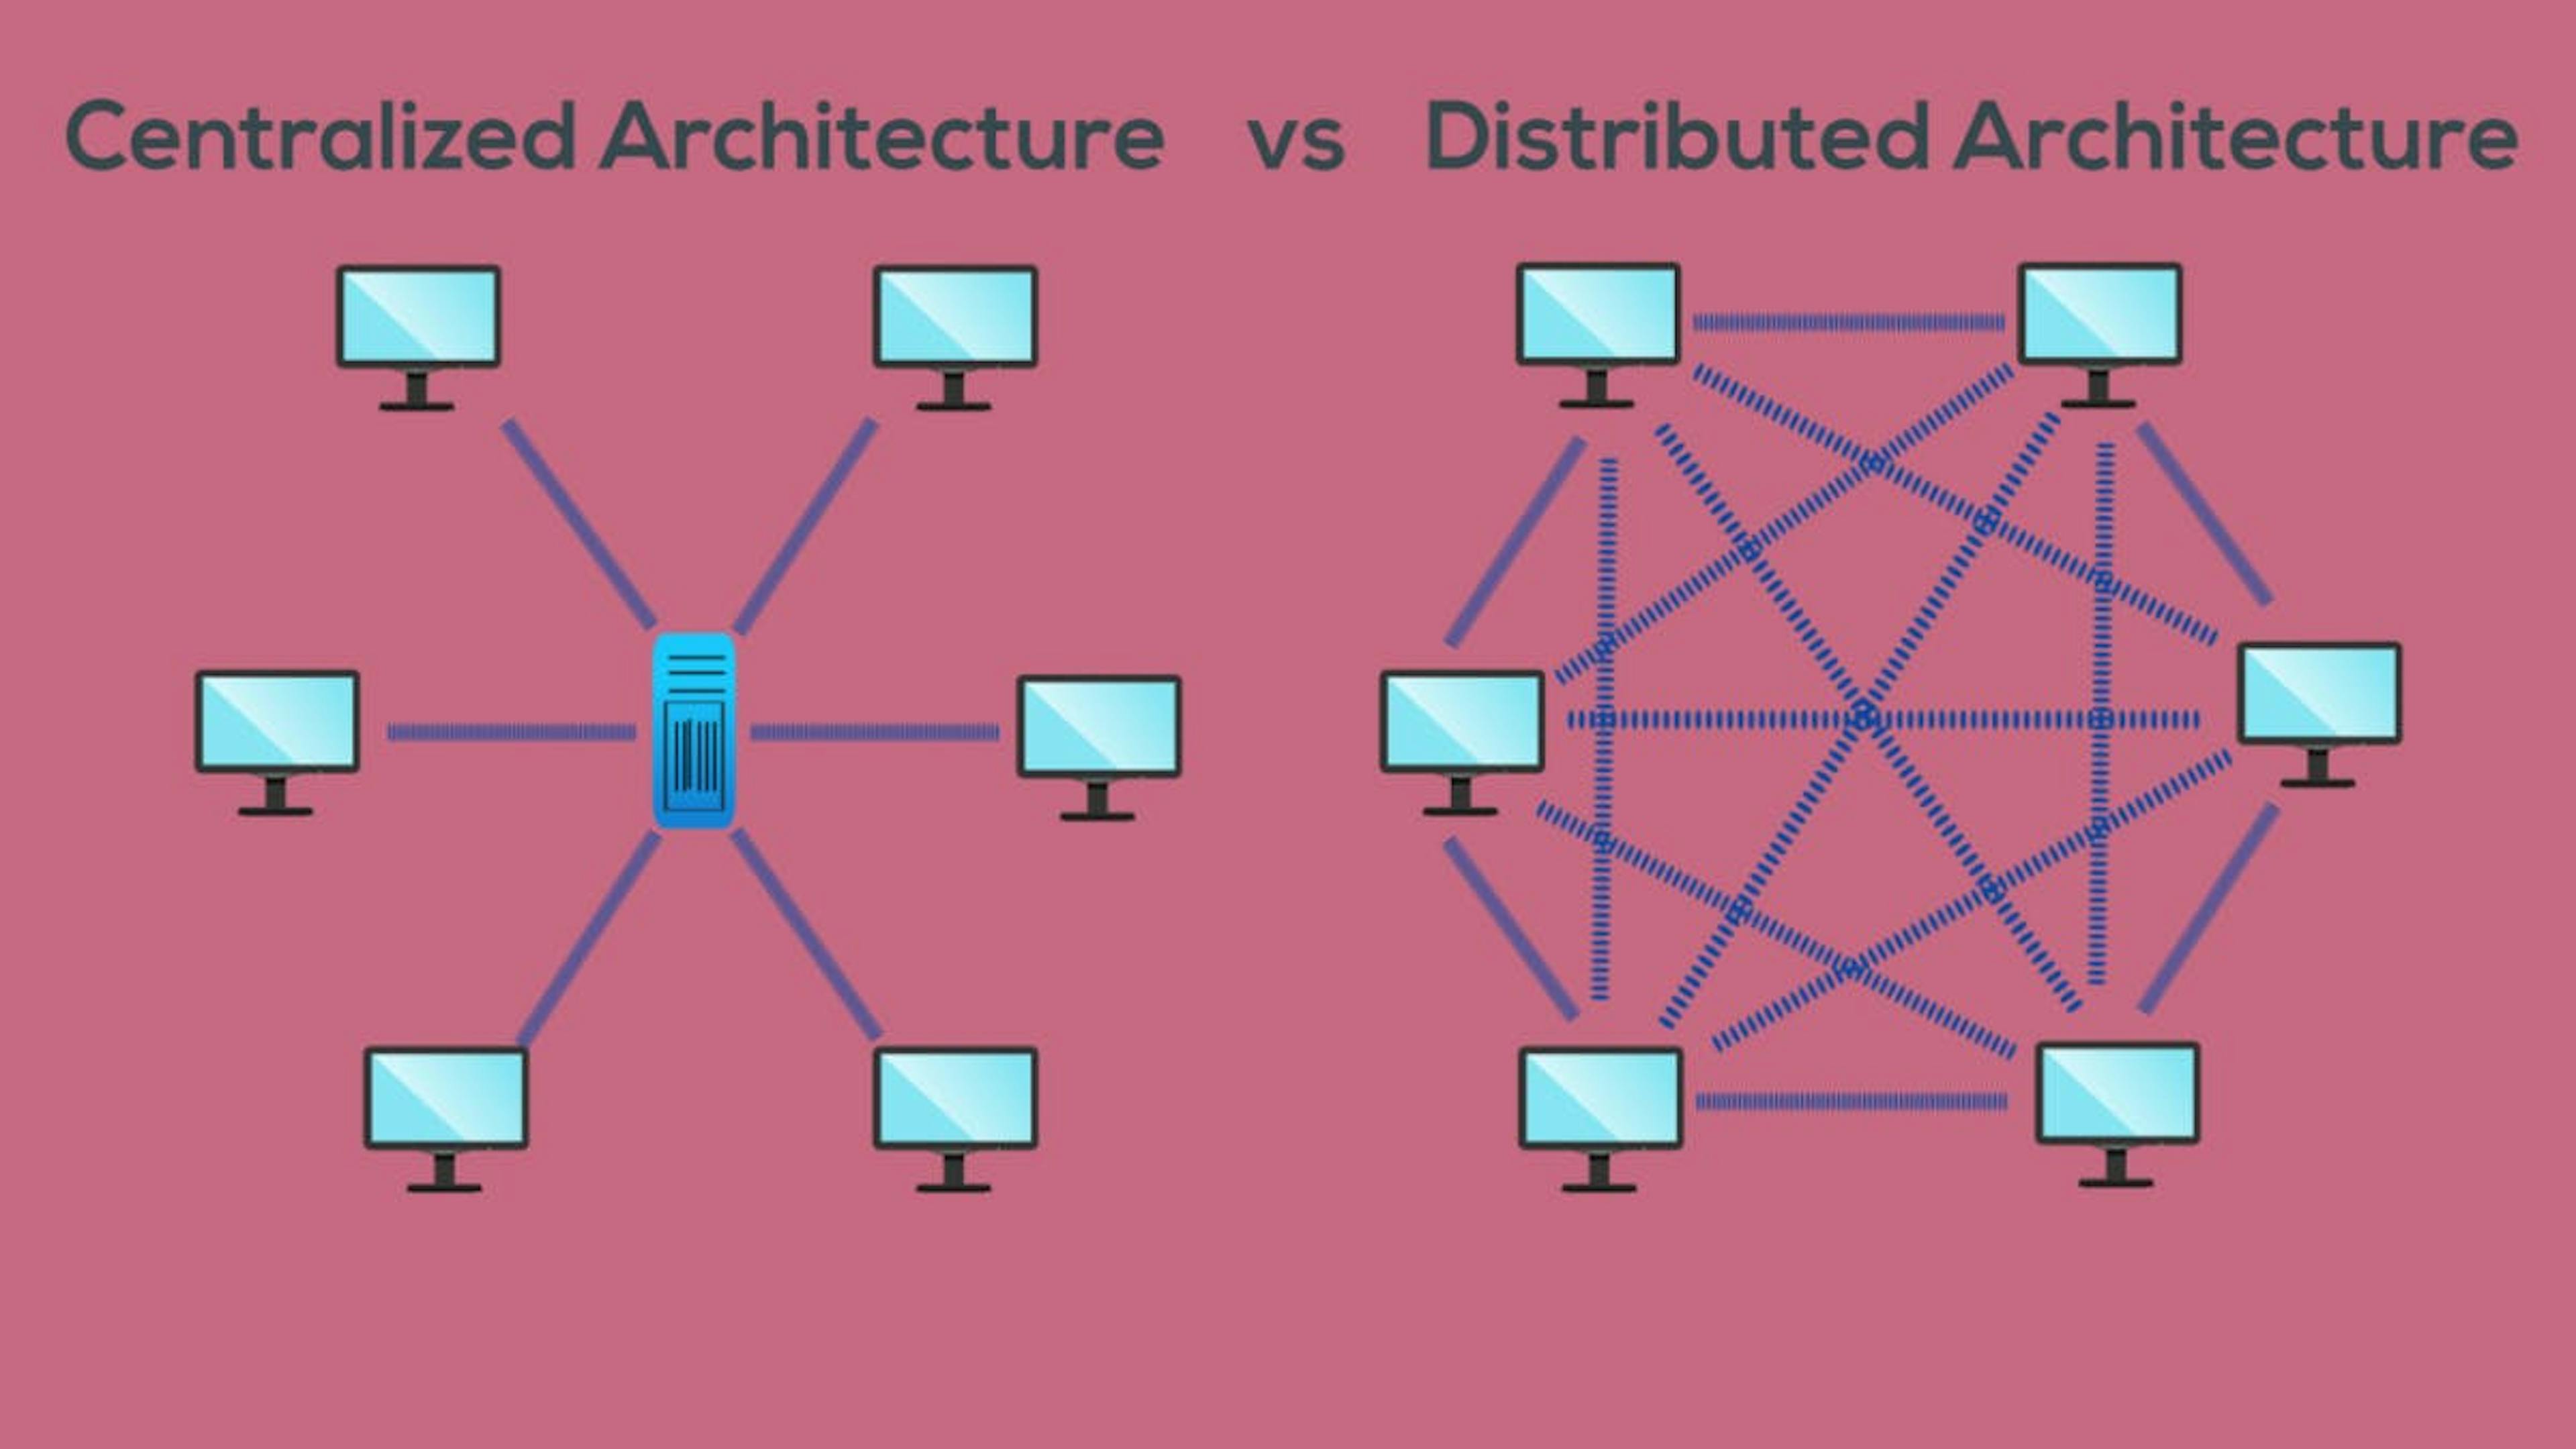  Distributed networks are more robust than centralized systems. Source: Merehead.com